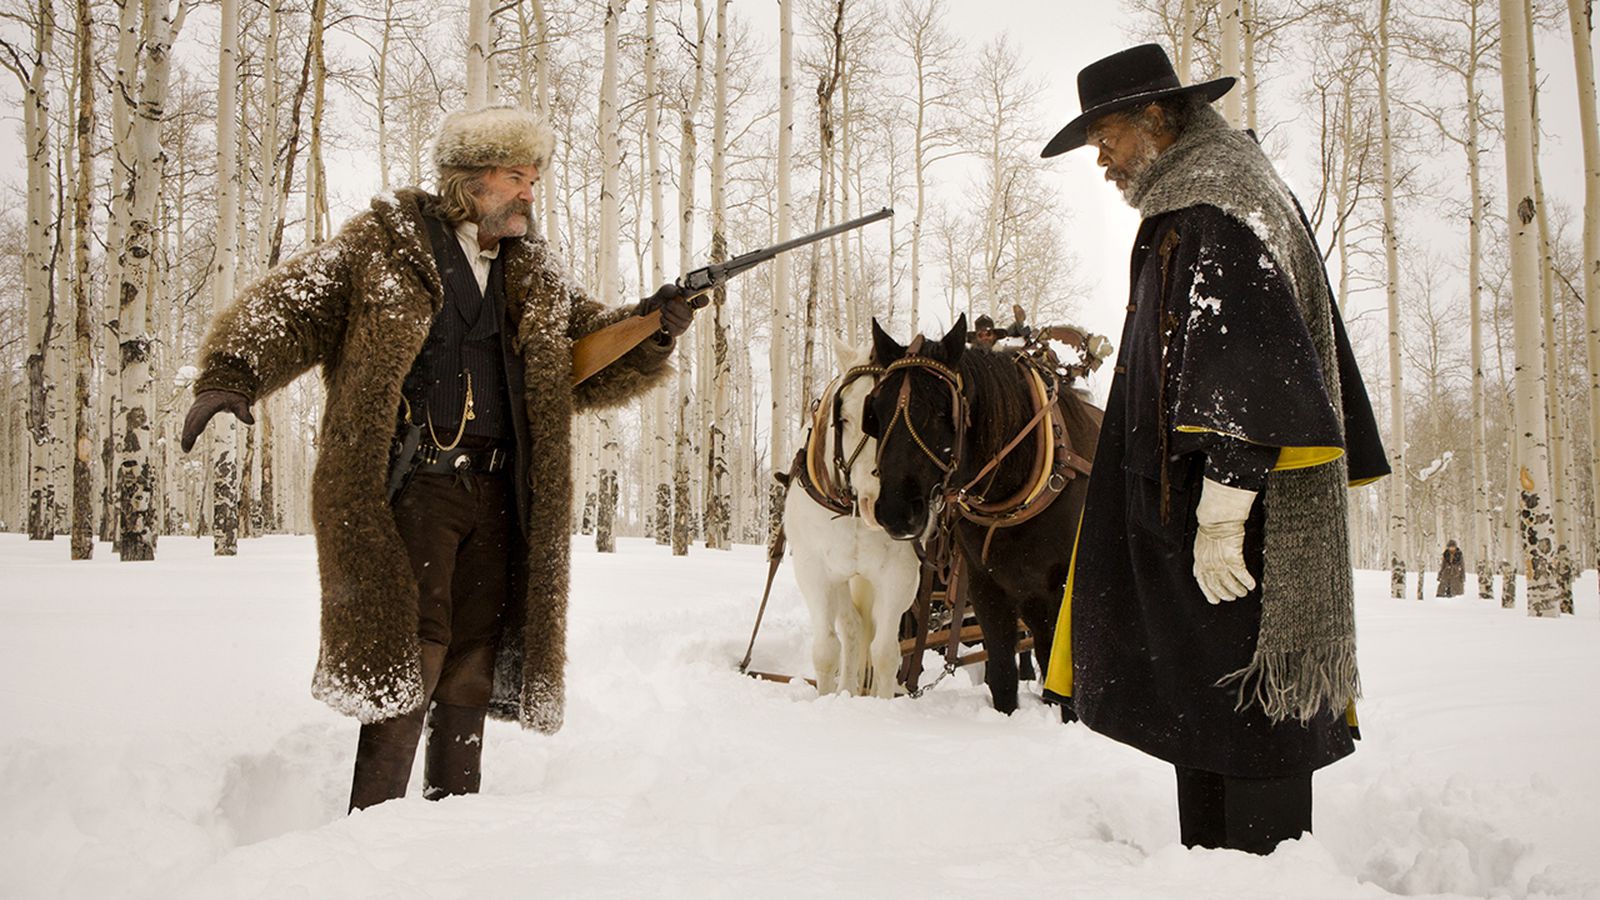 John Ruth holds Major Marquis Warren at gunpoint in The Hateful Eight